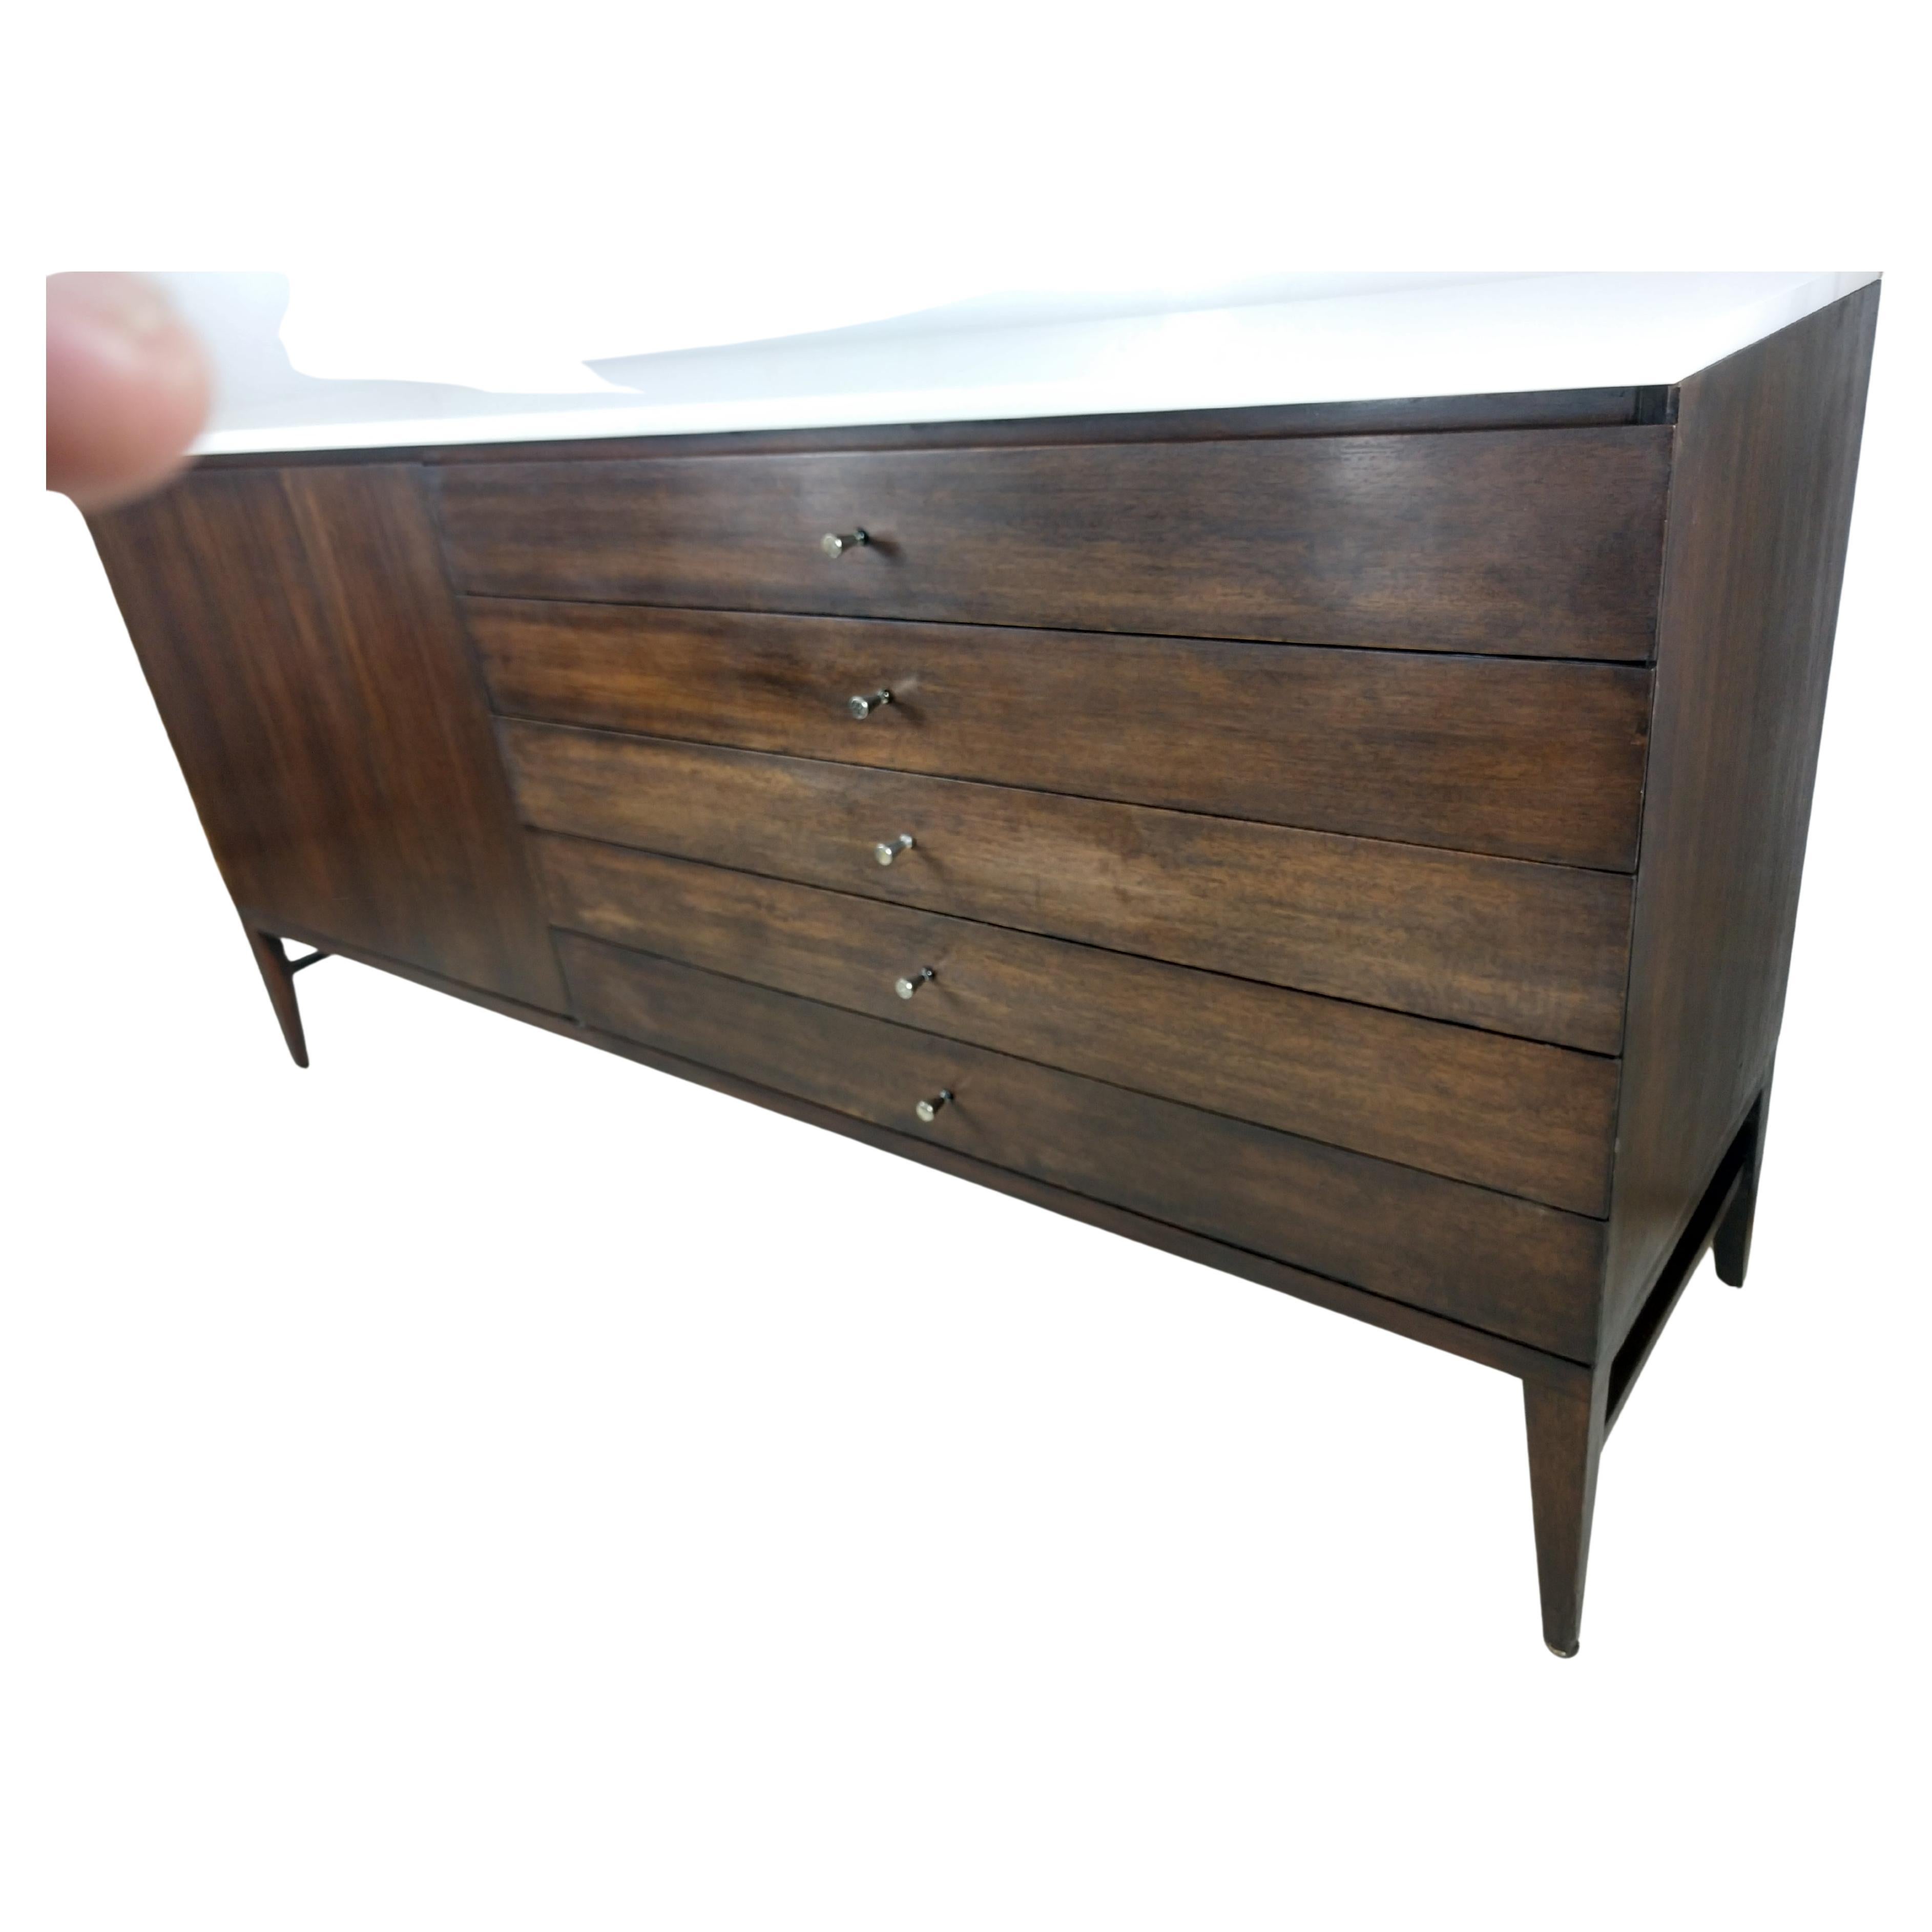 Mid-20th Century Mid-Century Modern Mahogany w Glass Dresser Credenza by Paul McCobb for Calvin  For Sale